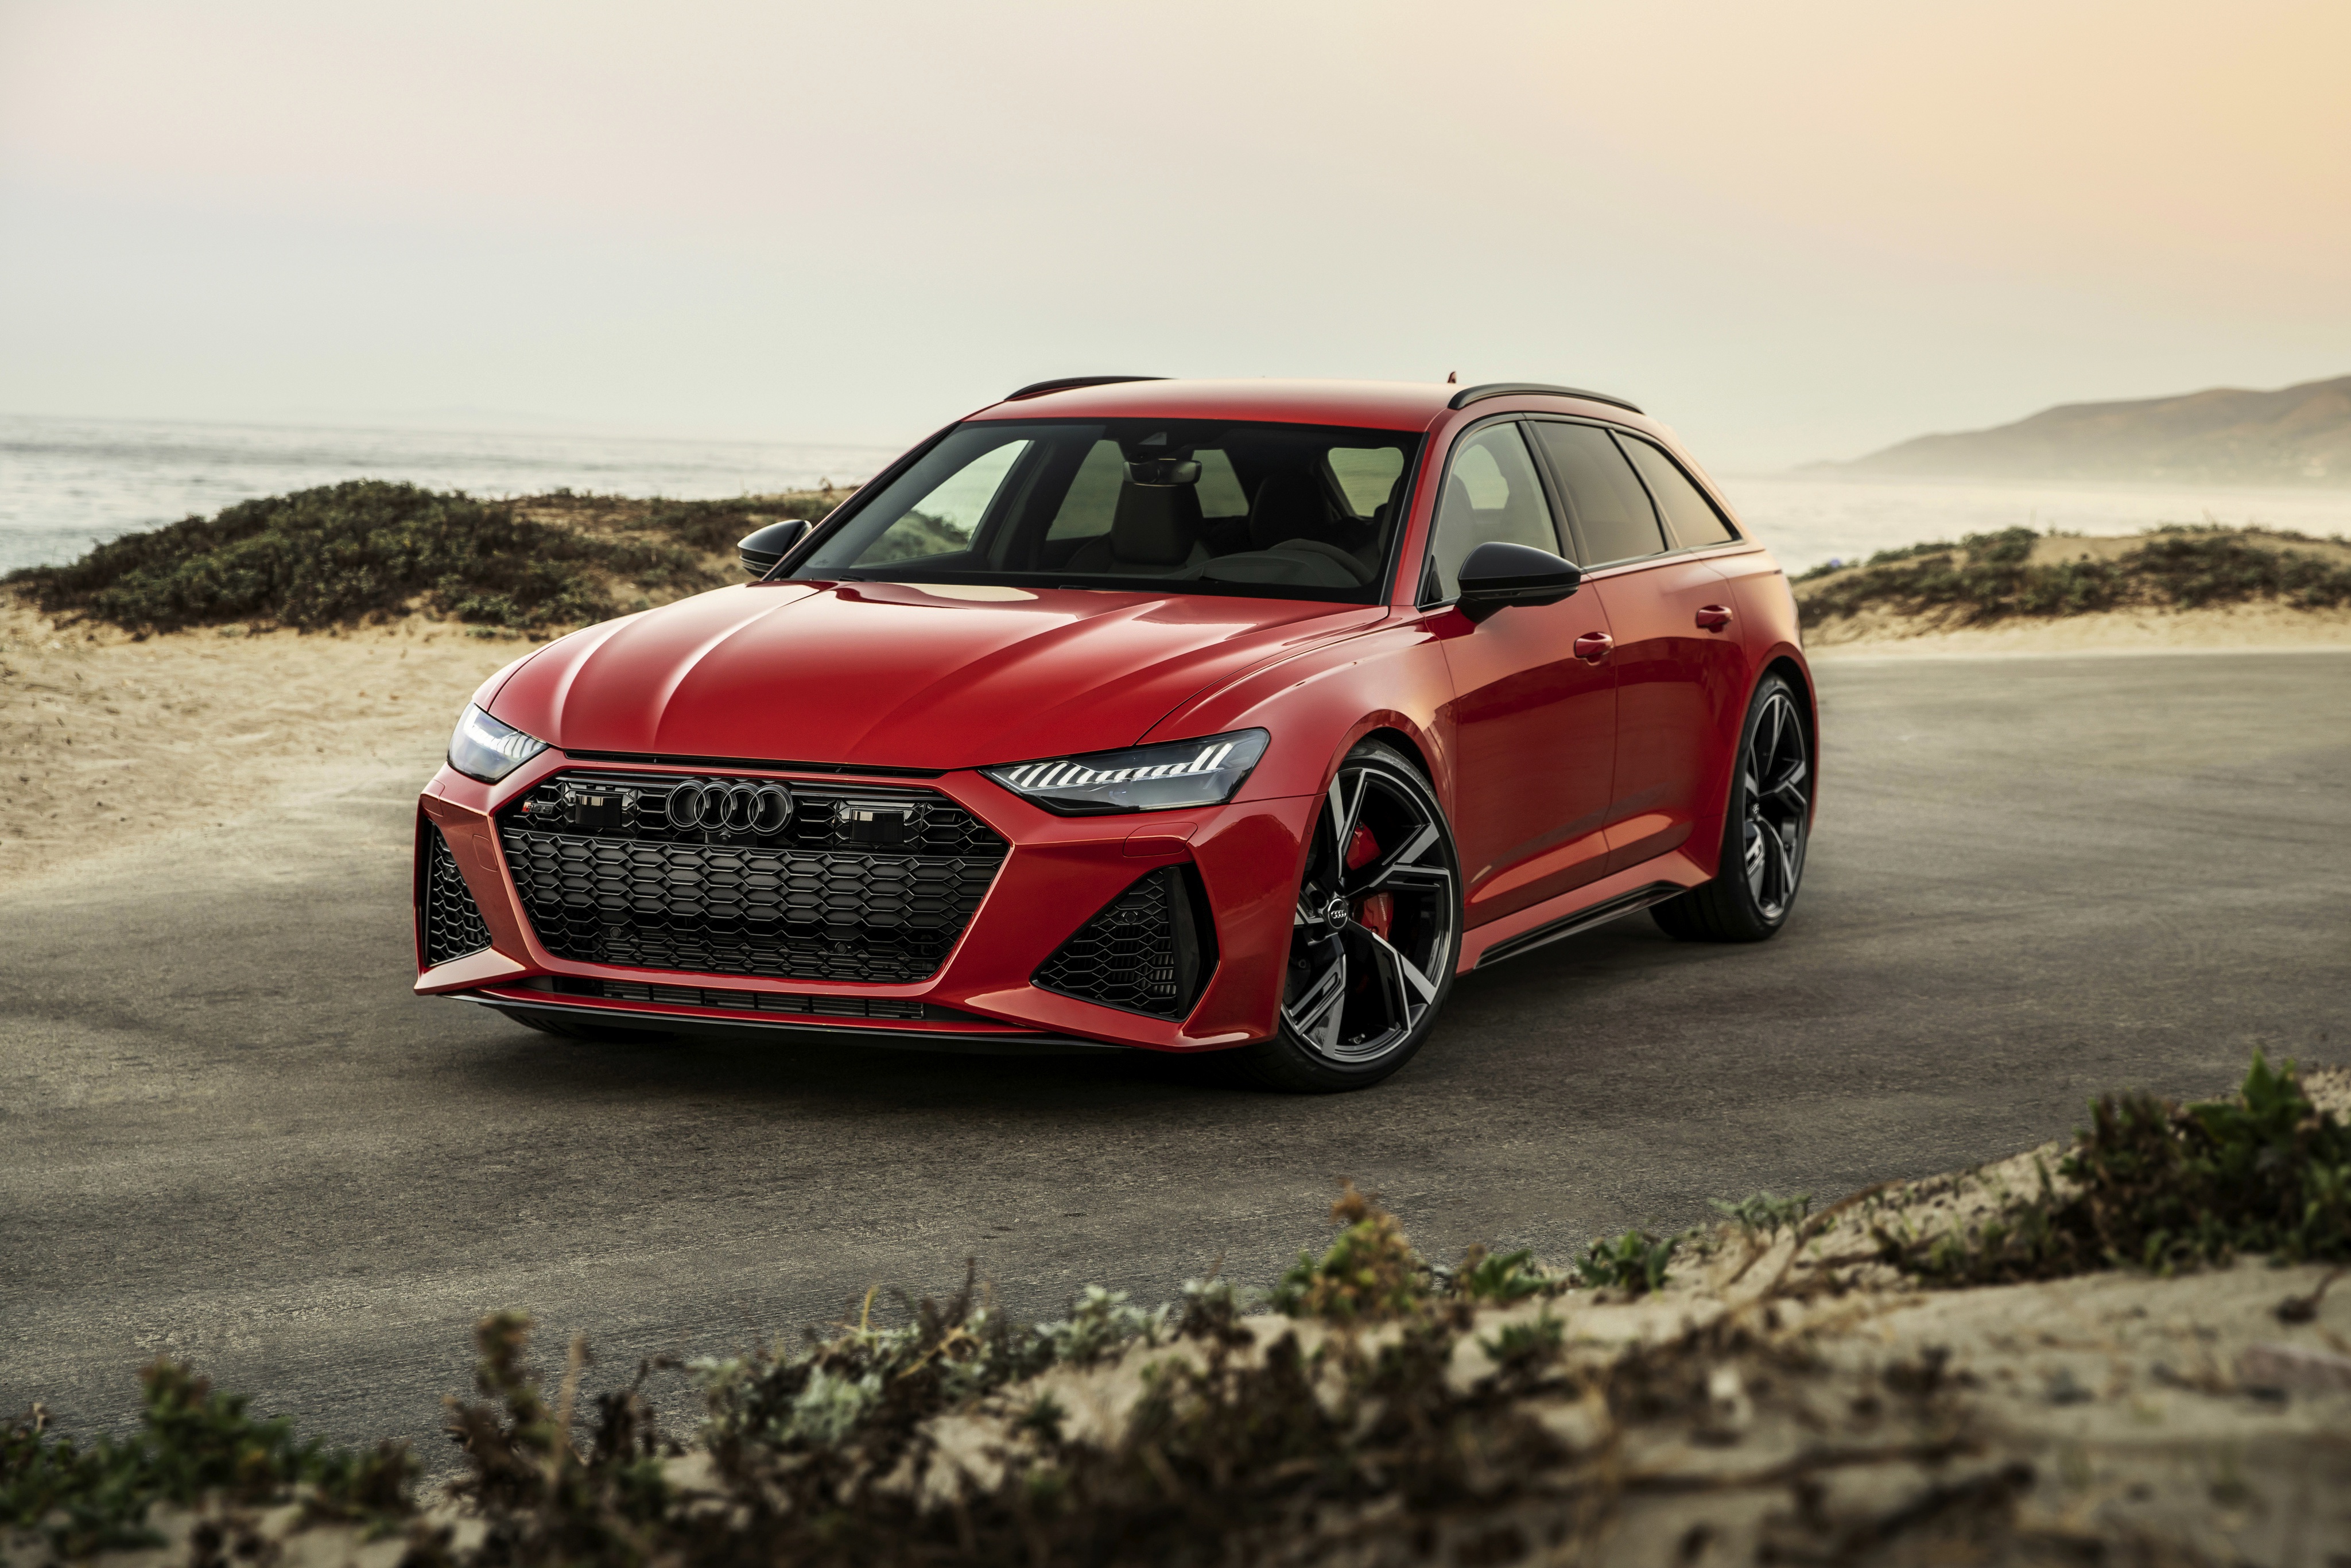 Audi RS6 Avant HD Wallpaper and Background